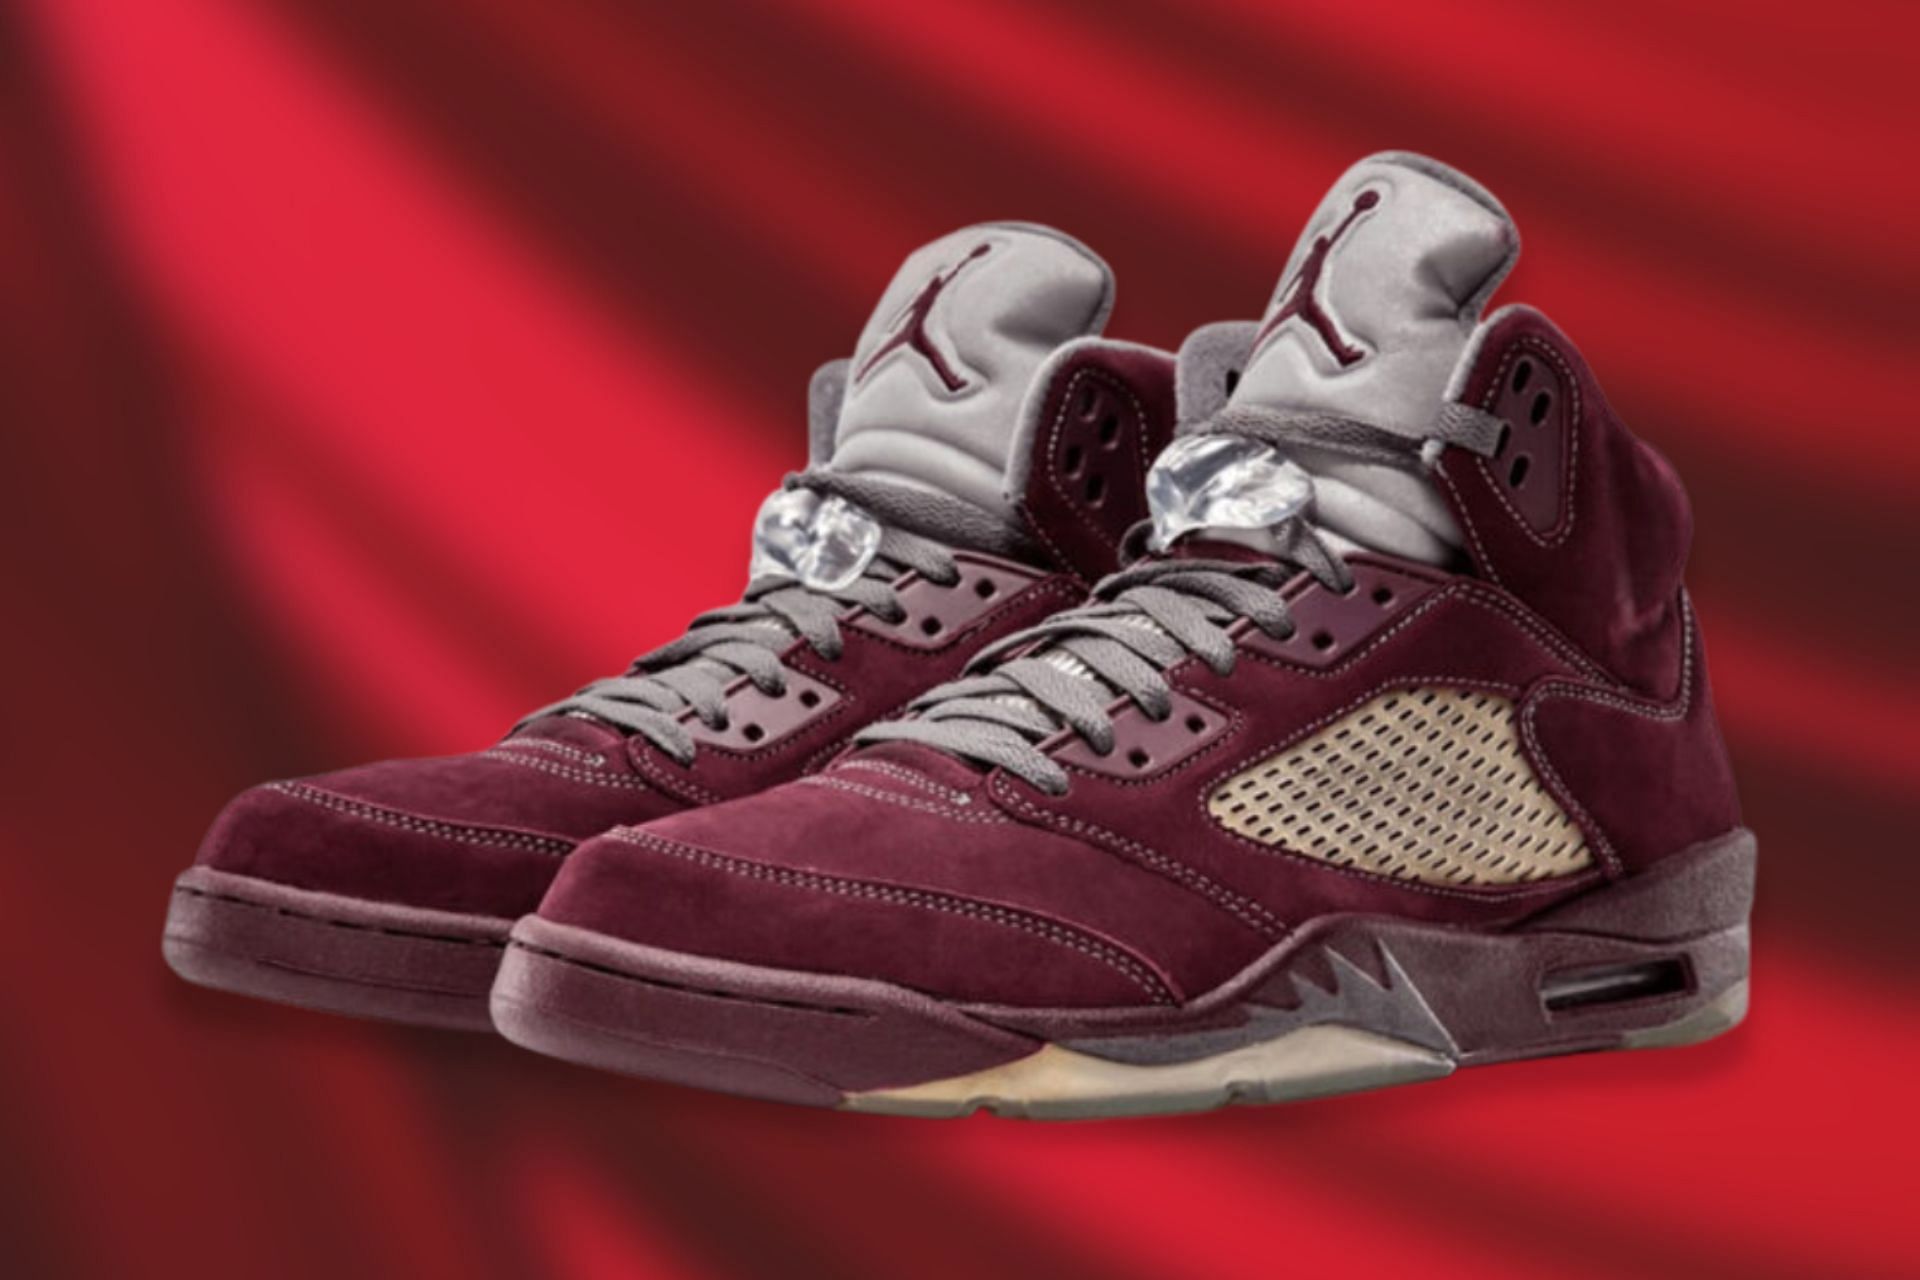 Where to buy Air Jordan 5 Retro “Burgundy” shoes? Price, release date ...